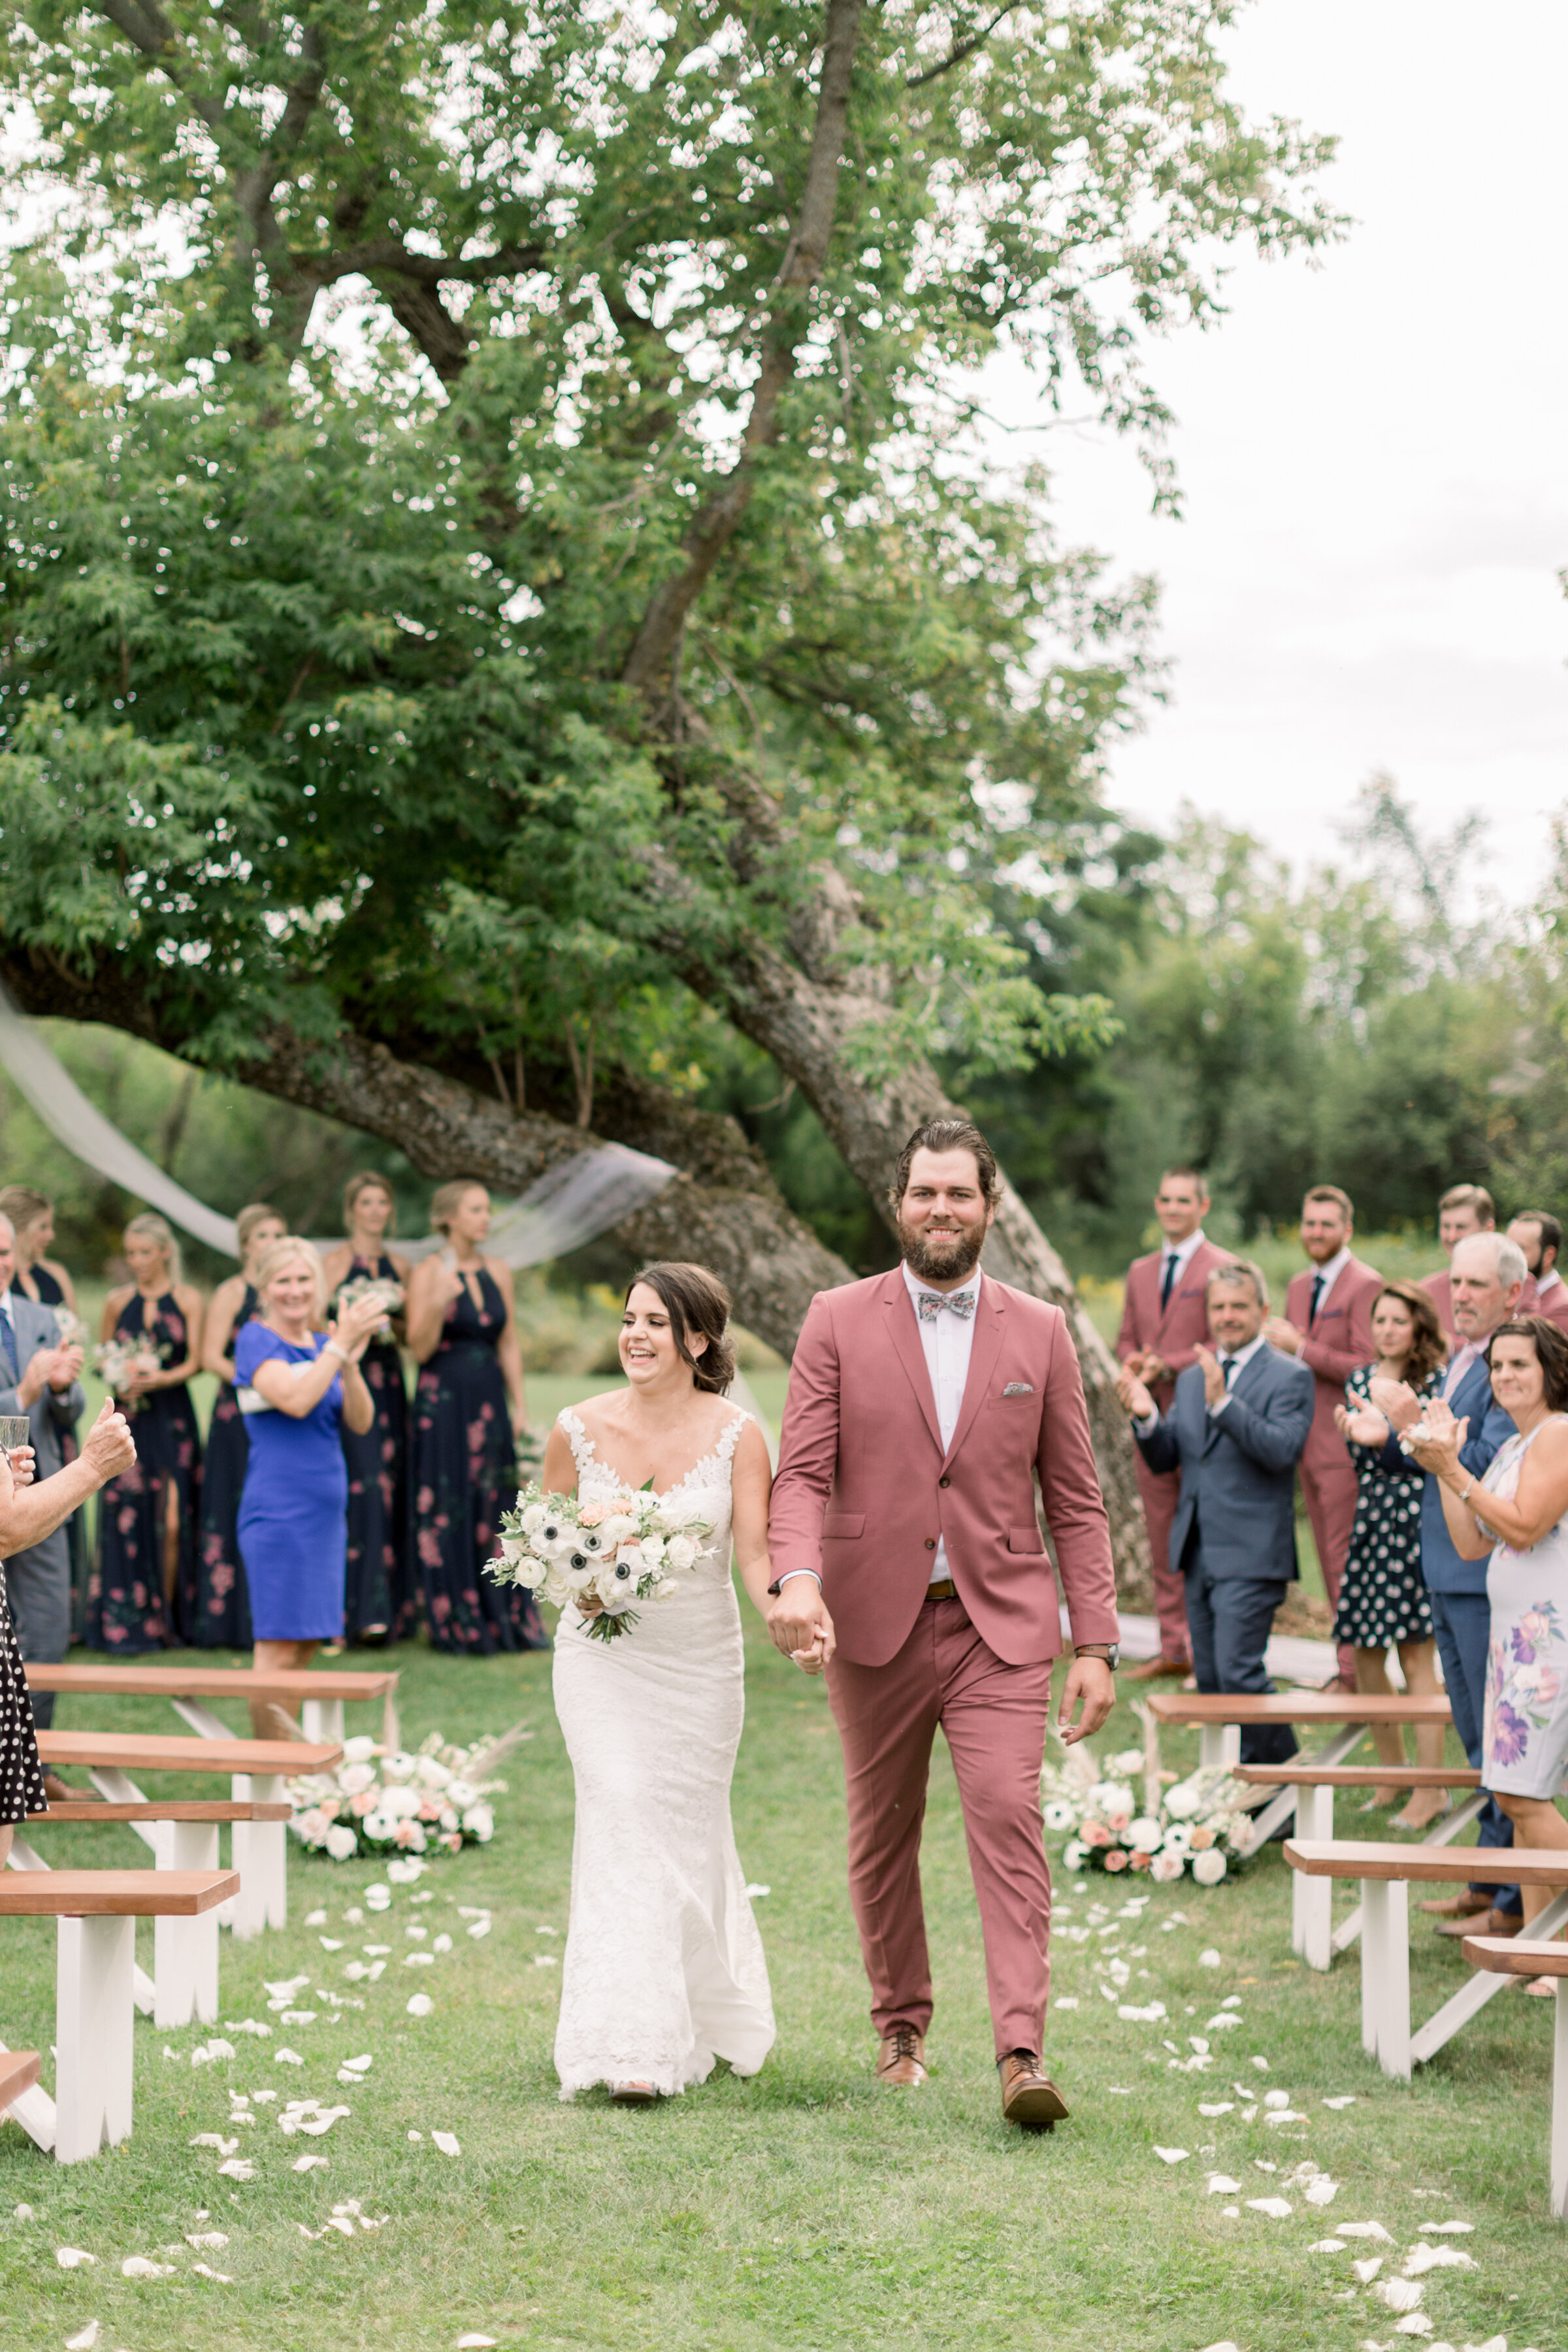  Beautiful couple walking down aisle during their outdoor wedding wearing blue and blush as their wedding colors by Chelsea Mason Photography. outdoor wedding locations making aisles for your wedding how to design your aisle for wedding blush and blu